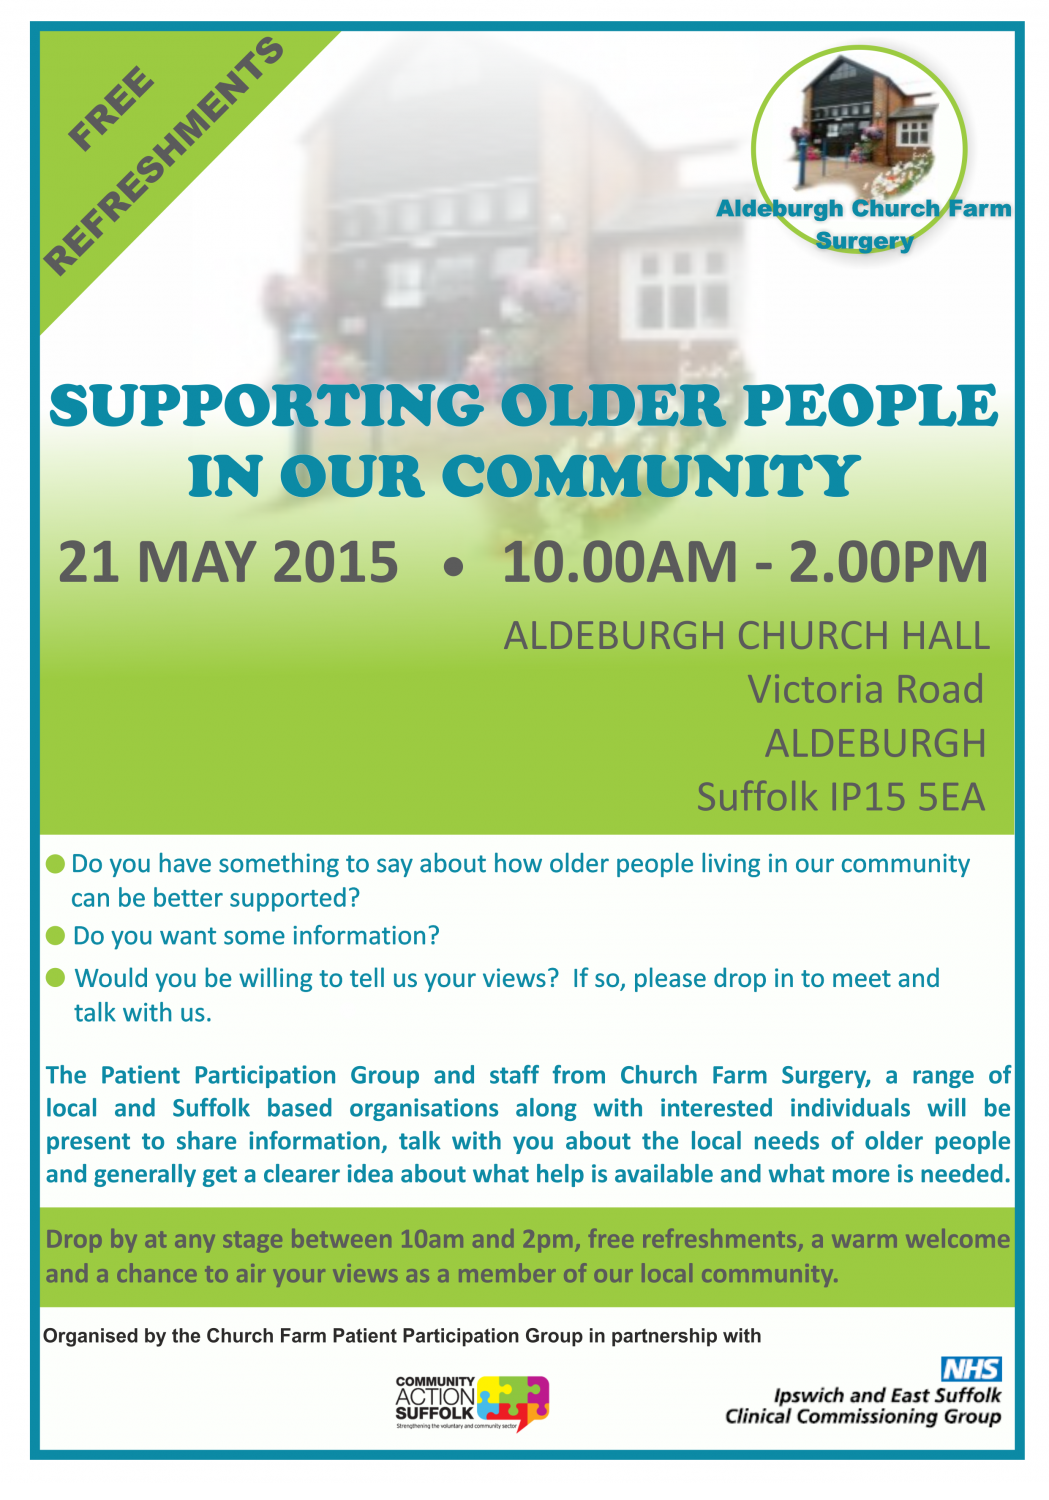 Supporting older people in the Aldeburgh community